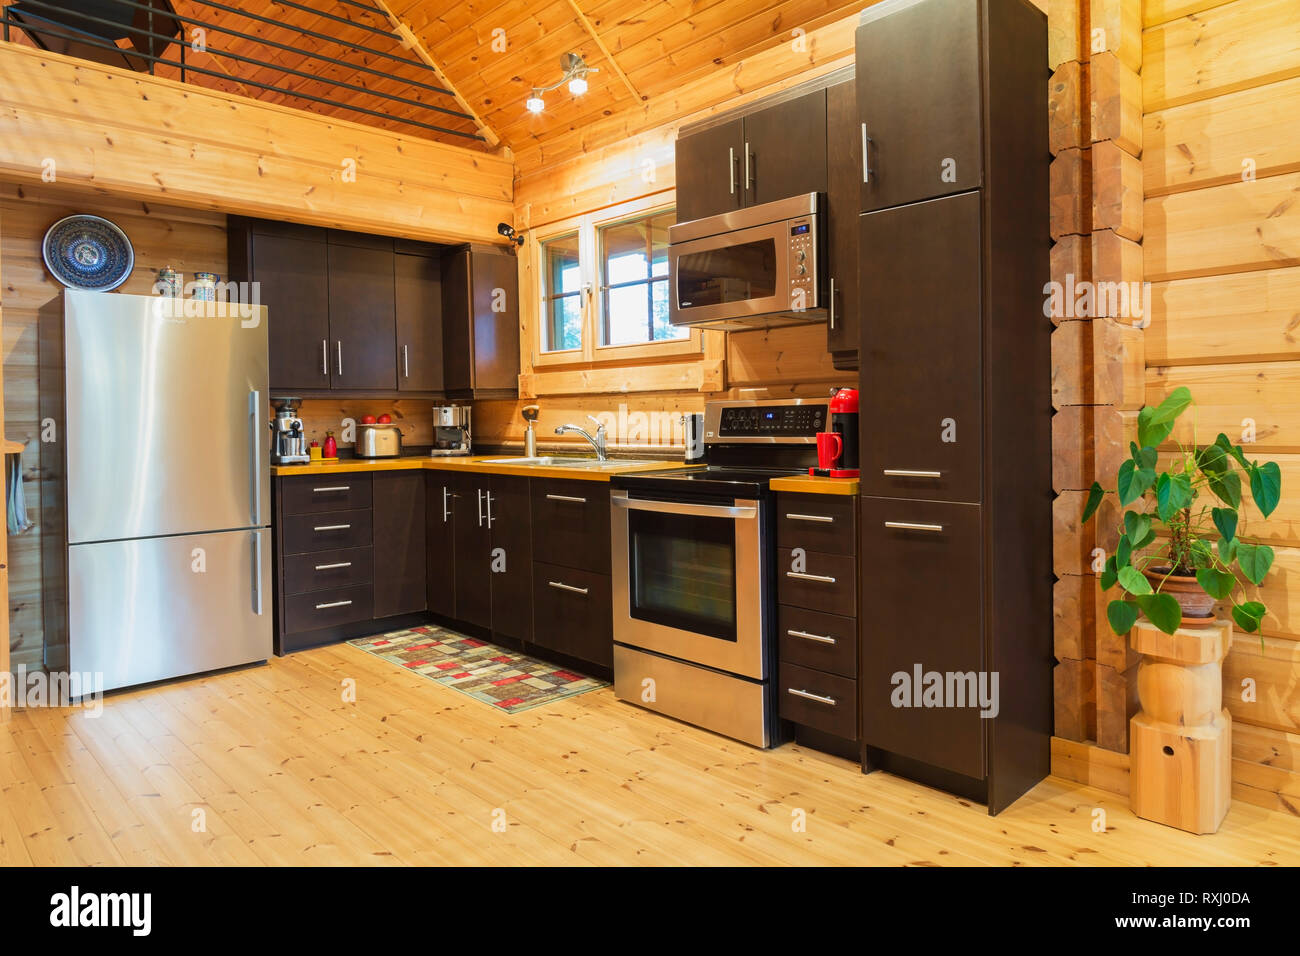 Natural Wood Countertops And Brown Cabinets With Microwave Oven